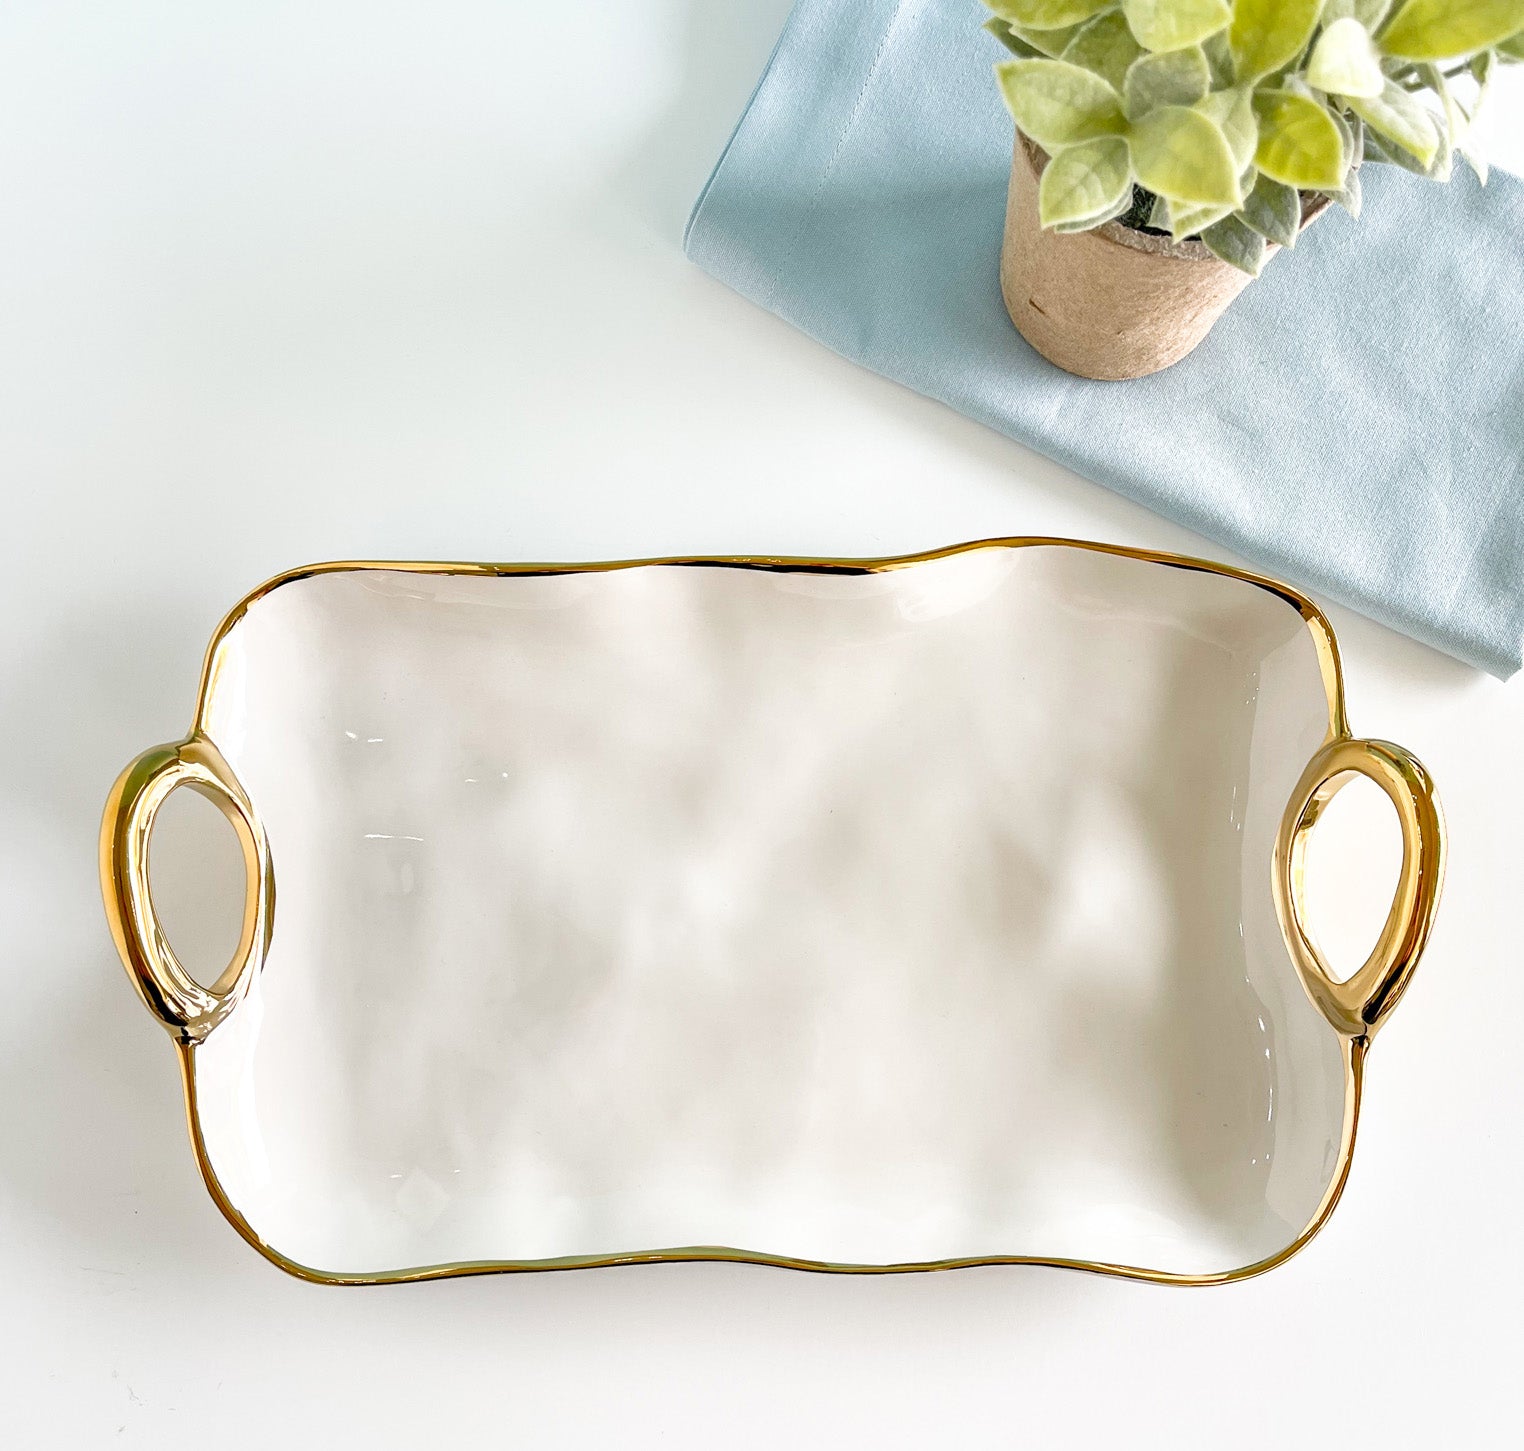 Broyhill White Decorative Tray With Gold Handles